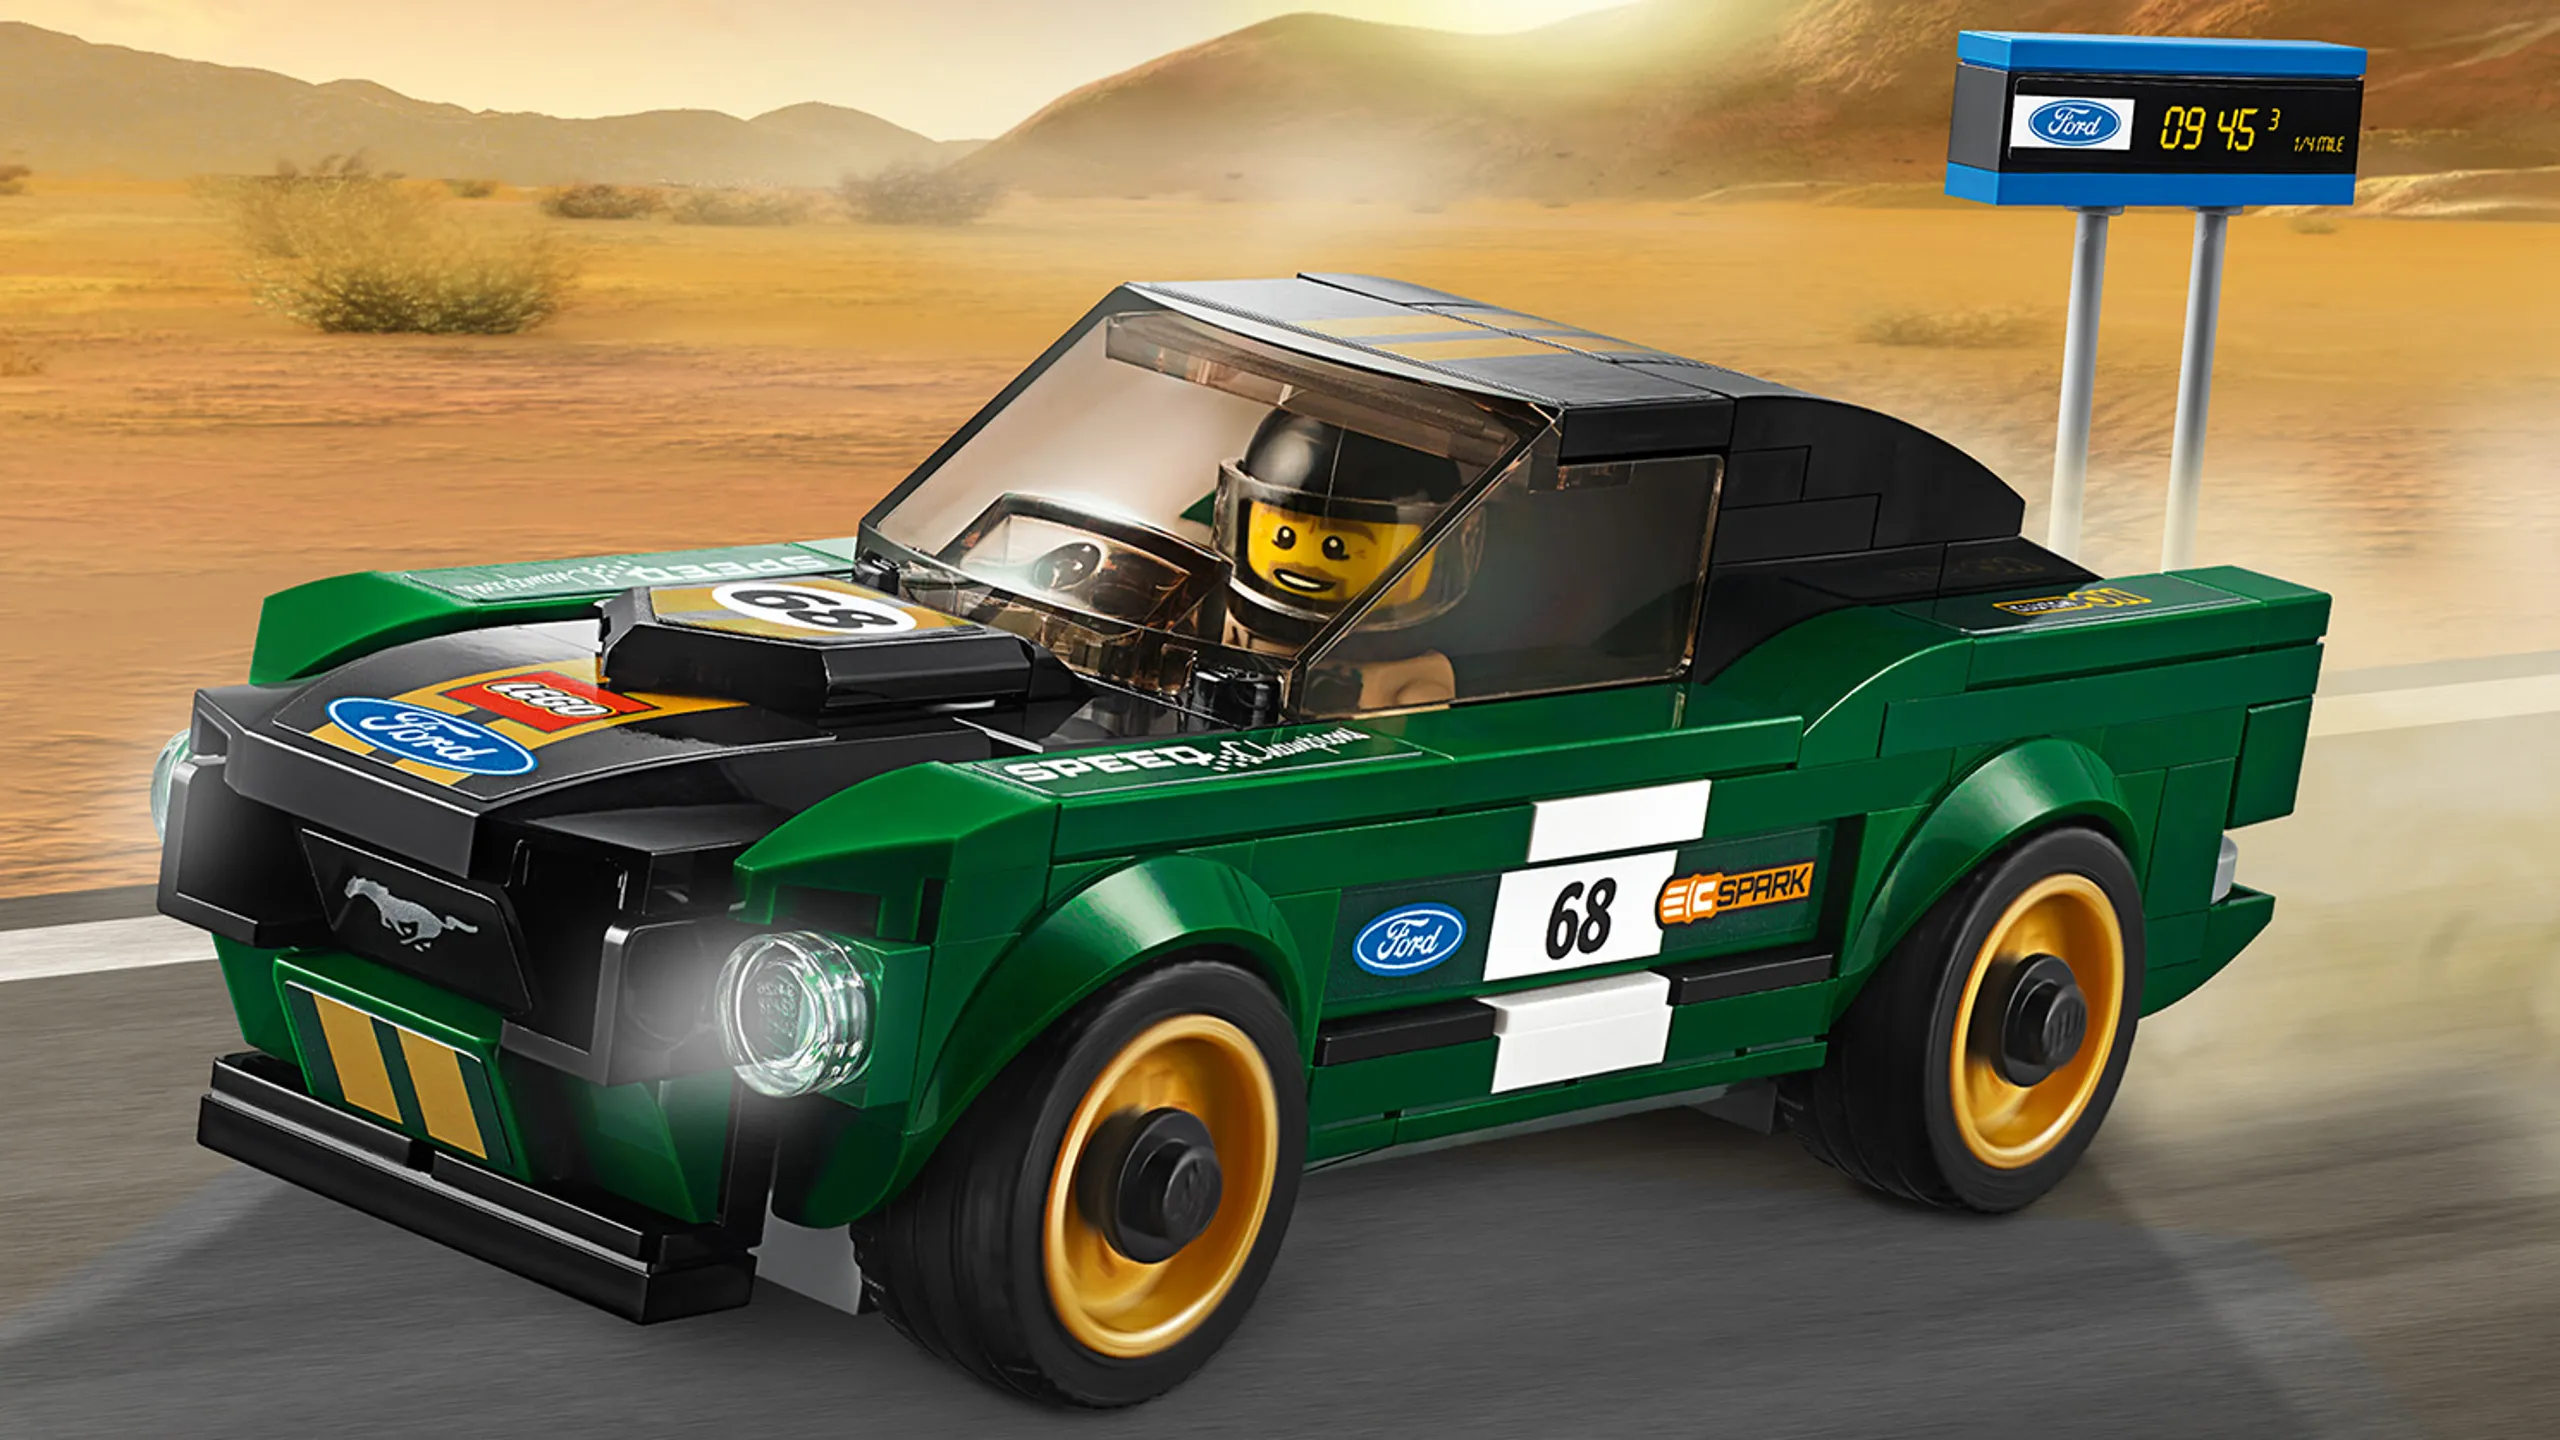 LEGO Speed Champions - 75884 1968 Ford Mustang Fastback - Race in this classic car and watch the timing board to keep track of your racing skills.